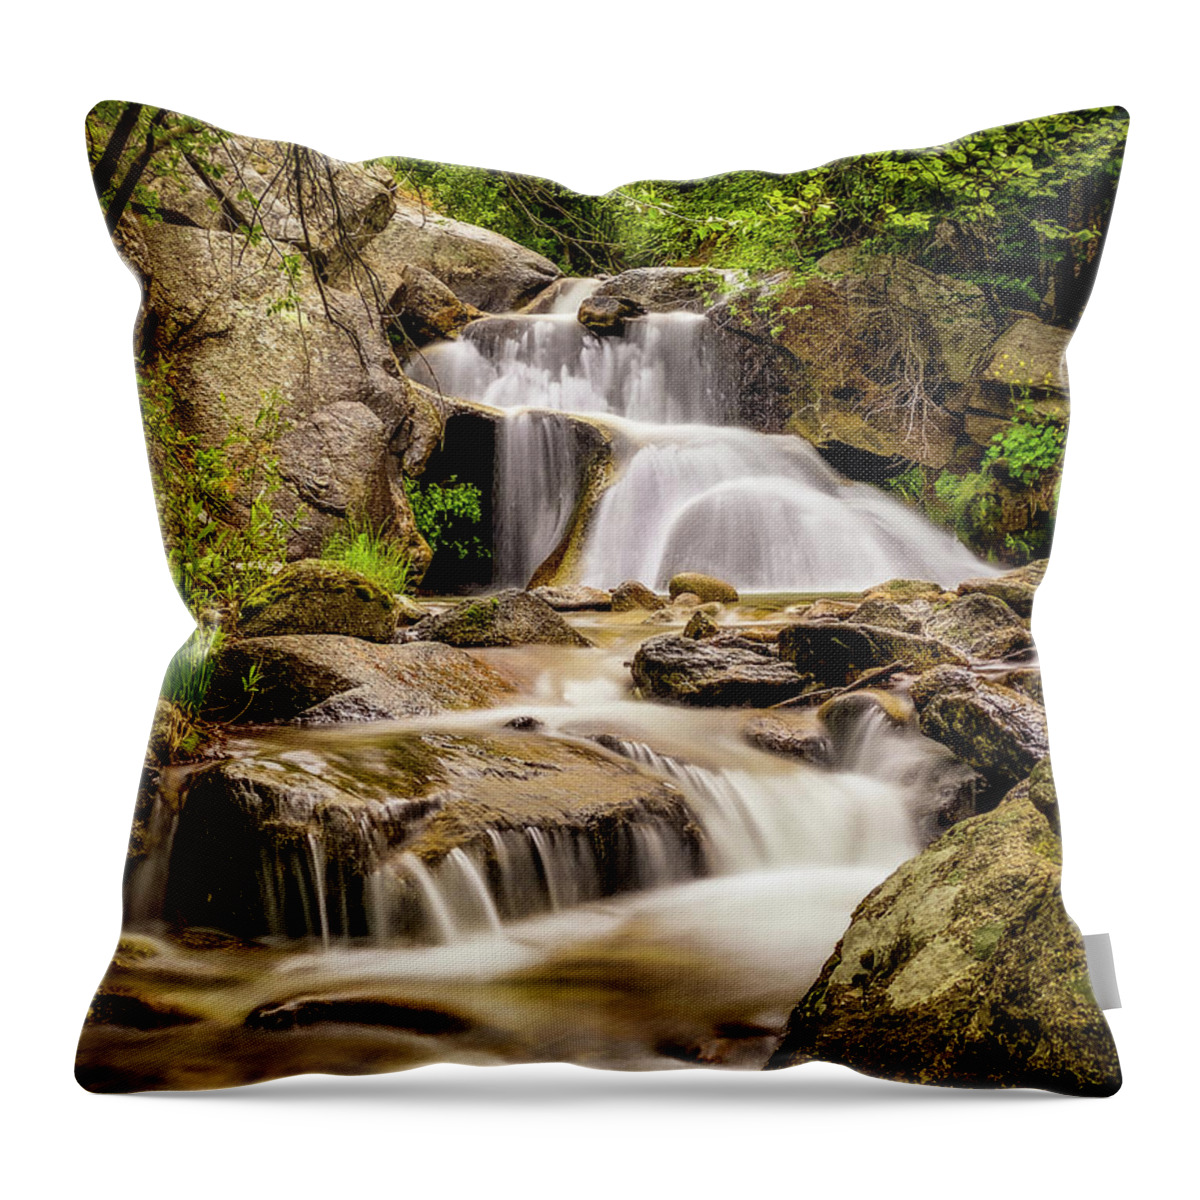 3falls Throw Pillow featuring the photograph 3 Falls by Bradley Morris